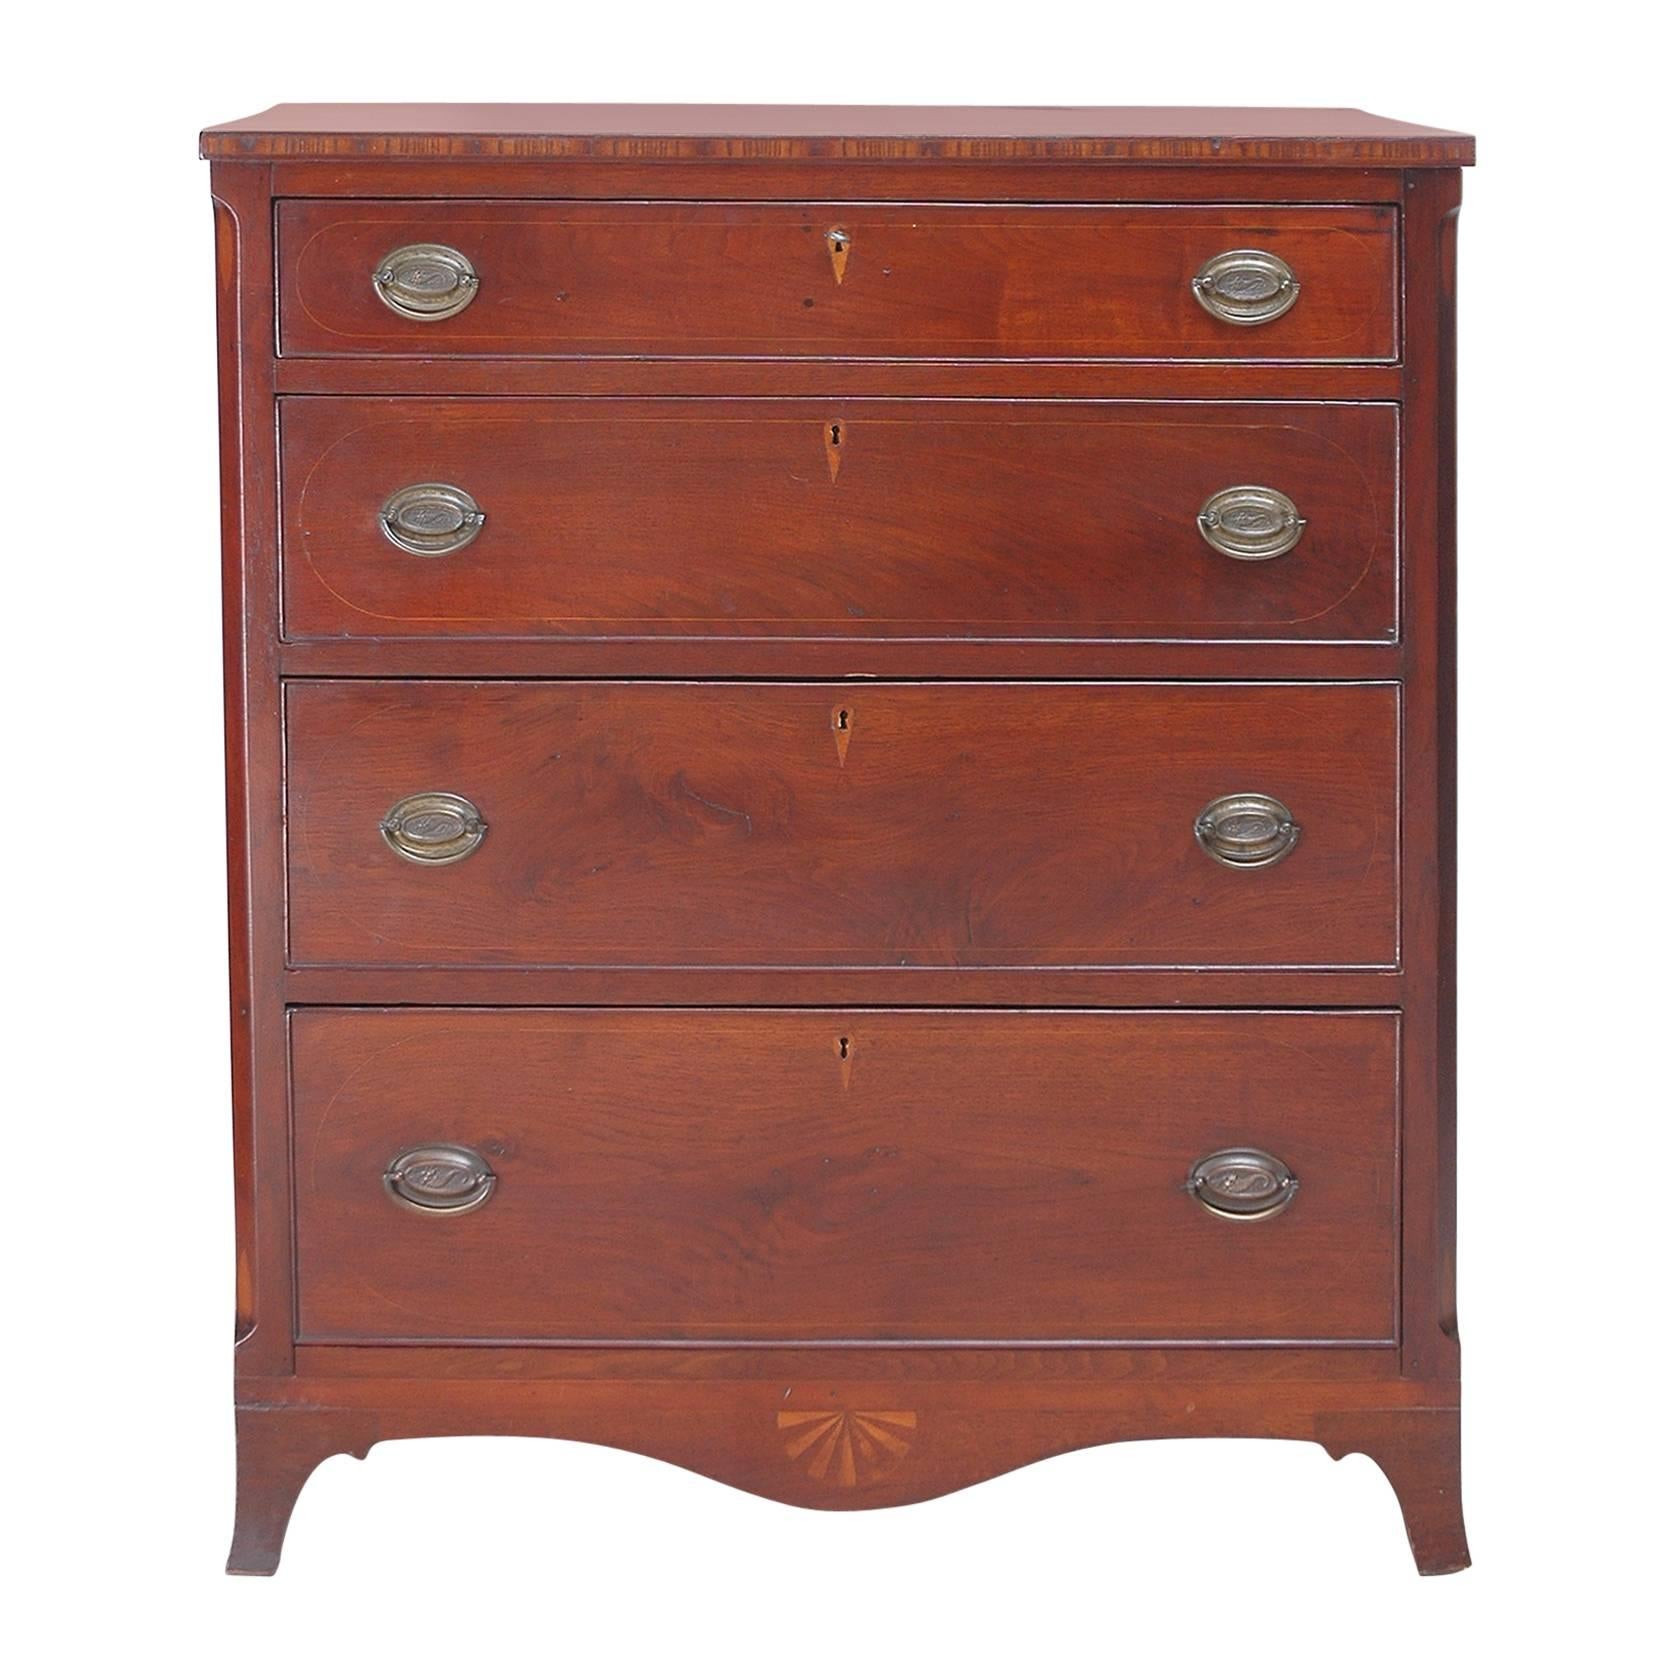 American Hepplewhite Chest of Drawers or Bureau in Mahogany, circa 1800 For Sale